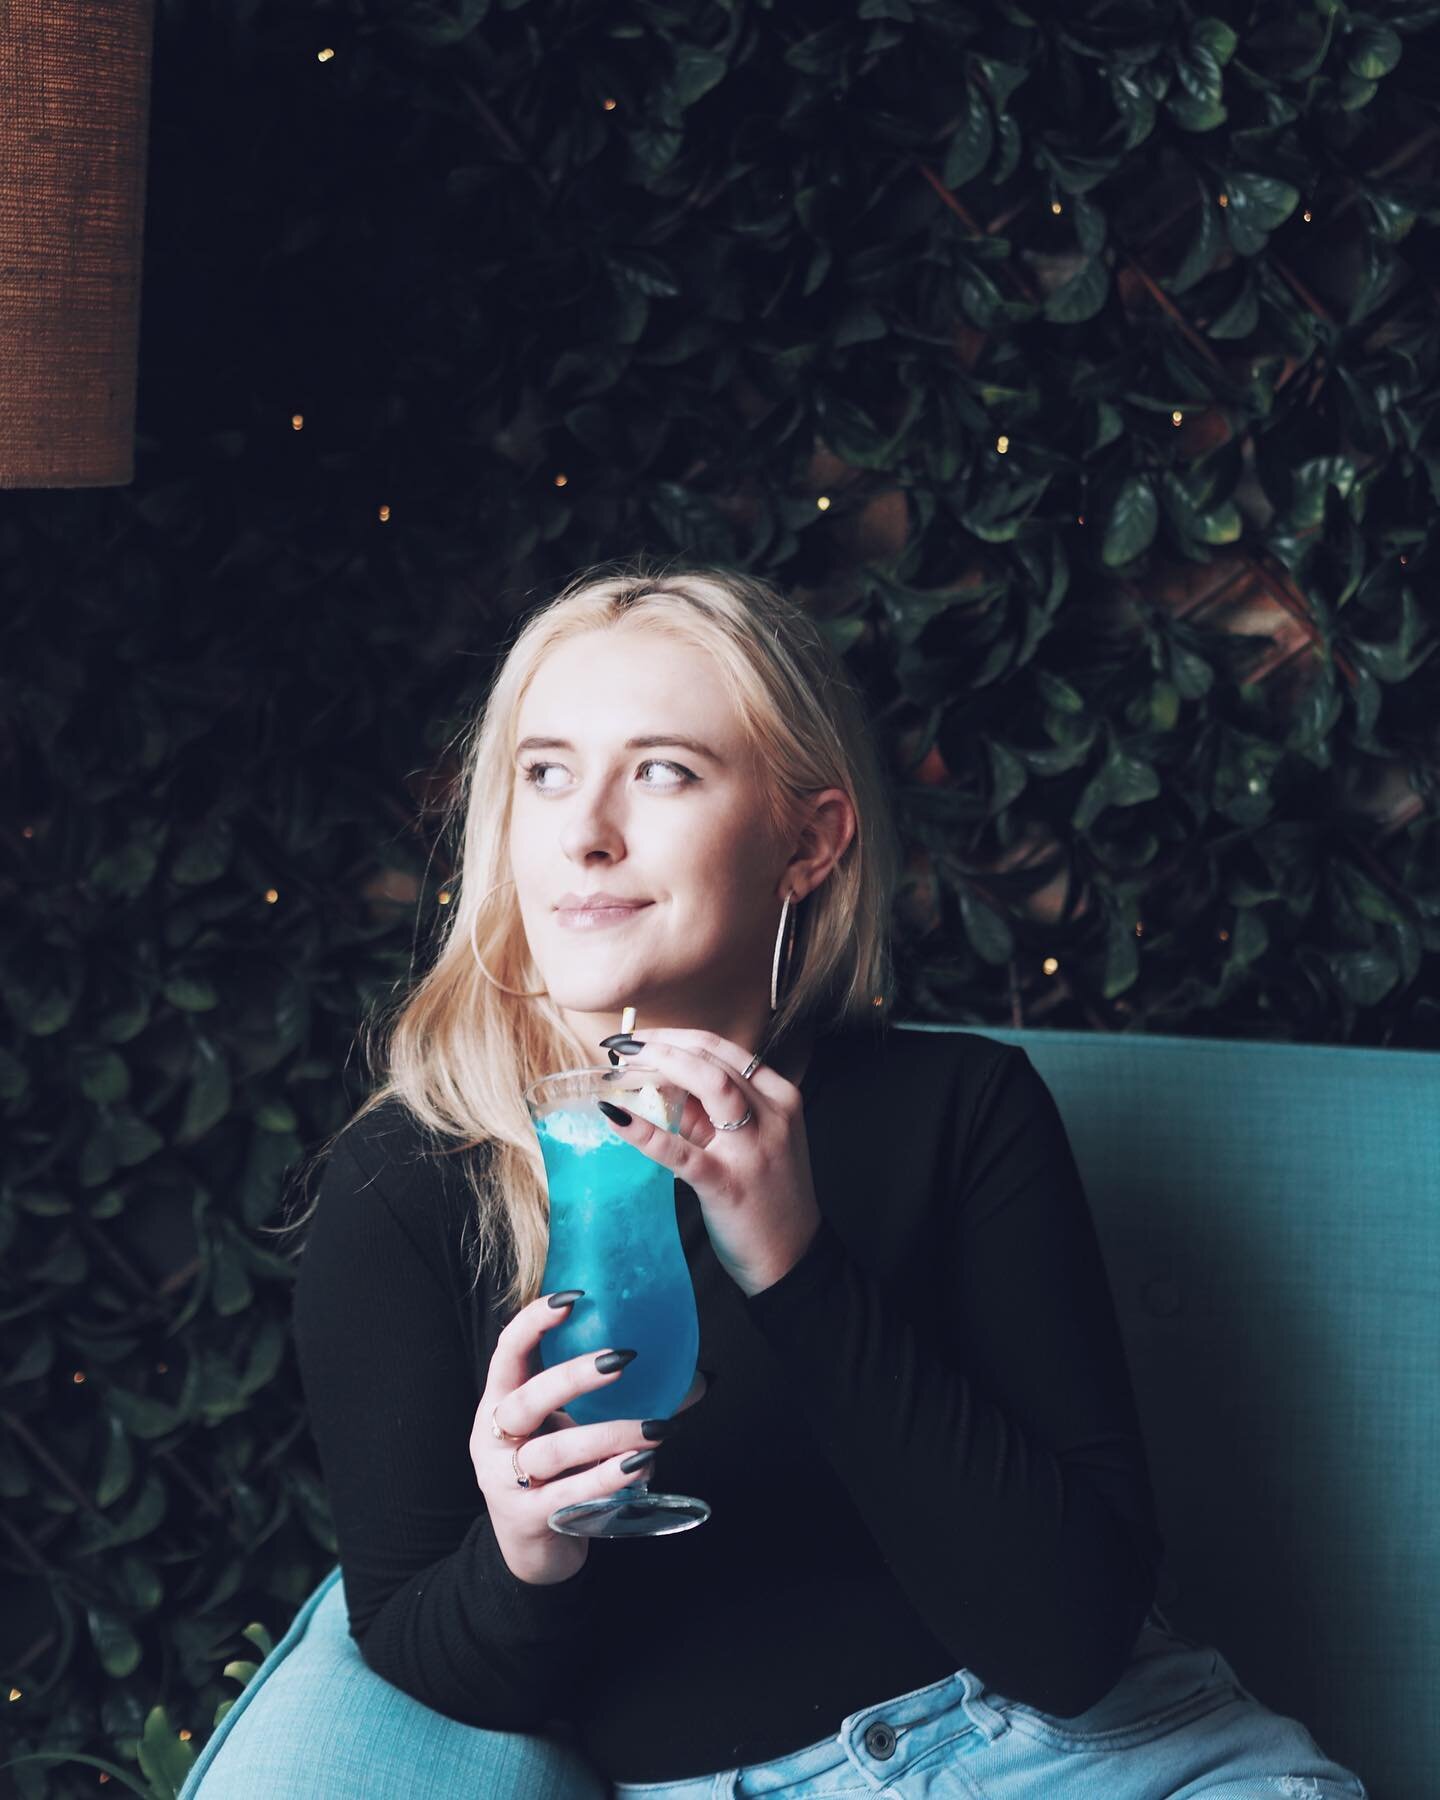 Do you also get the thought of endless cocktails after your first sip of one at bills?

It&rsquo;s ok, we&rsquo;re back open Thursday at 5pm to fulfil those Blue Lagoon thoughts xoxo
&bull;
&bull;
&bull;
&bull;
&bull;
#lostbills #badasstinybar #cockt